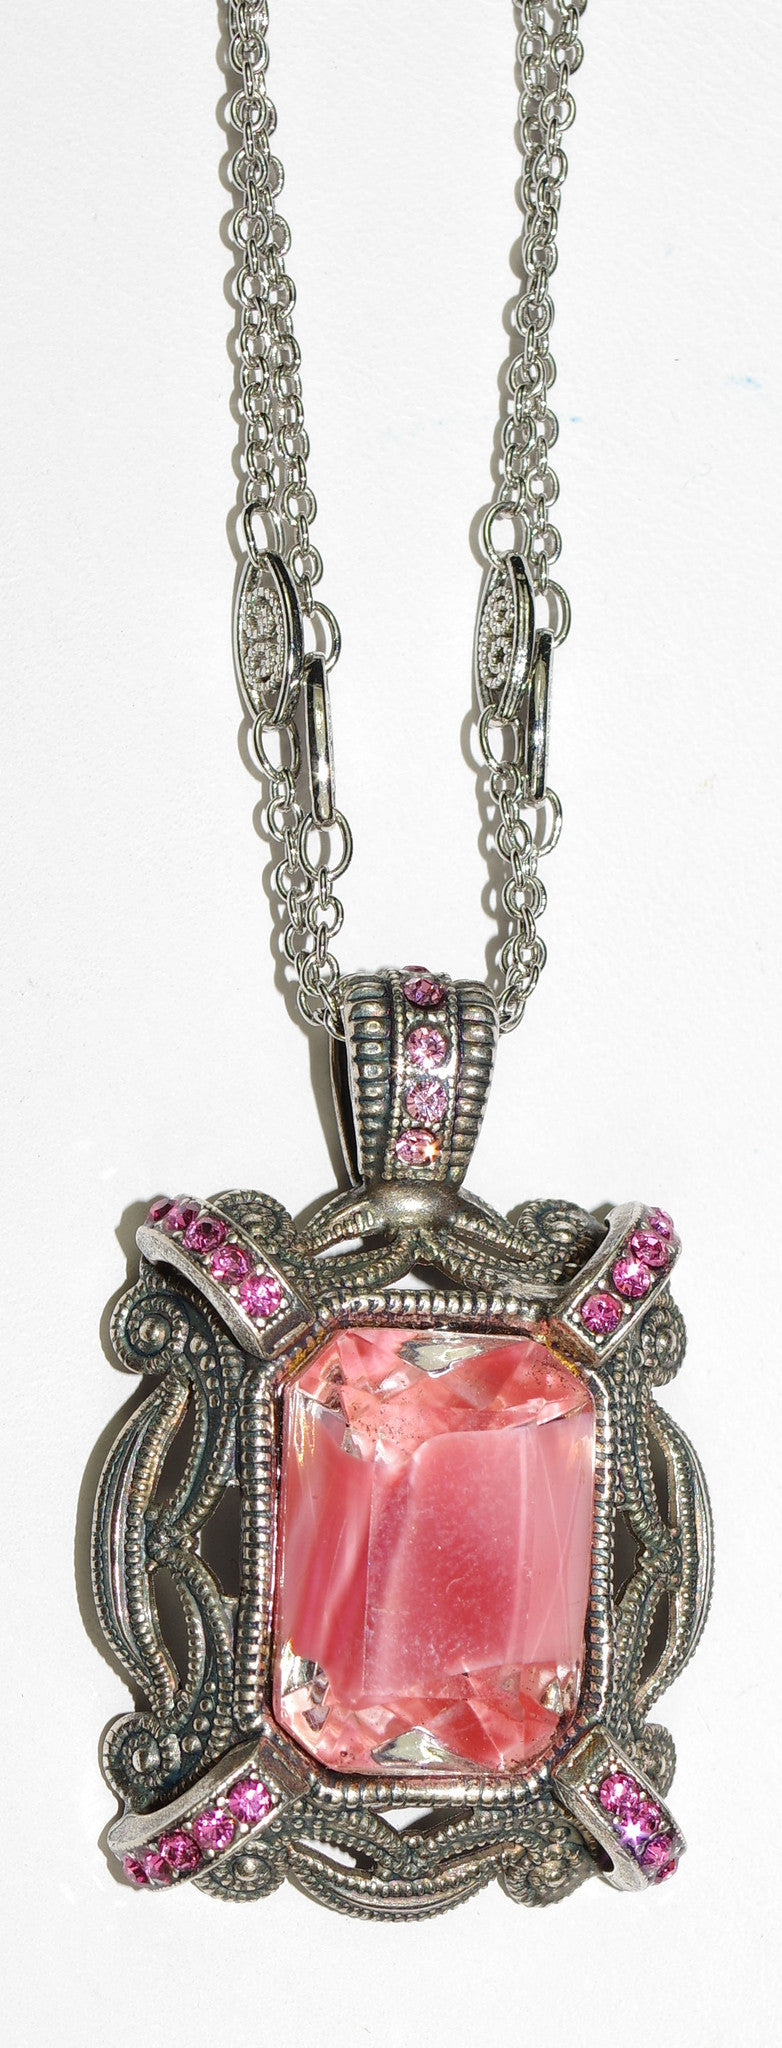 MARIANA PENDANT SMASHING PINK: pink stones in 1.5" charm, silver setting, 20" adjustable chain